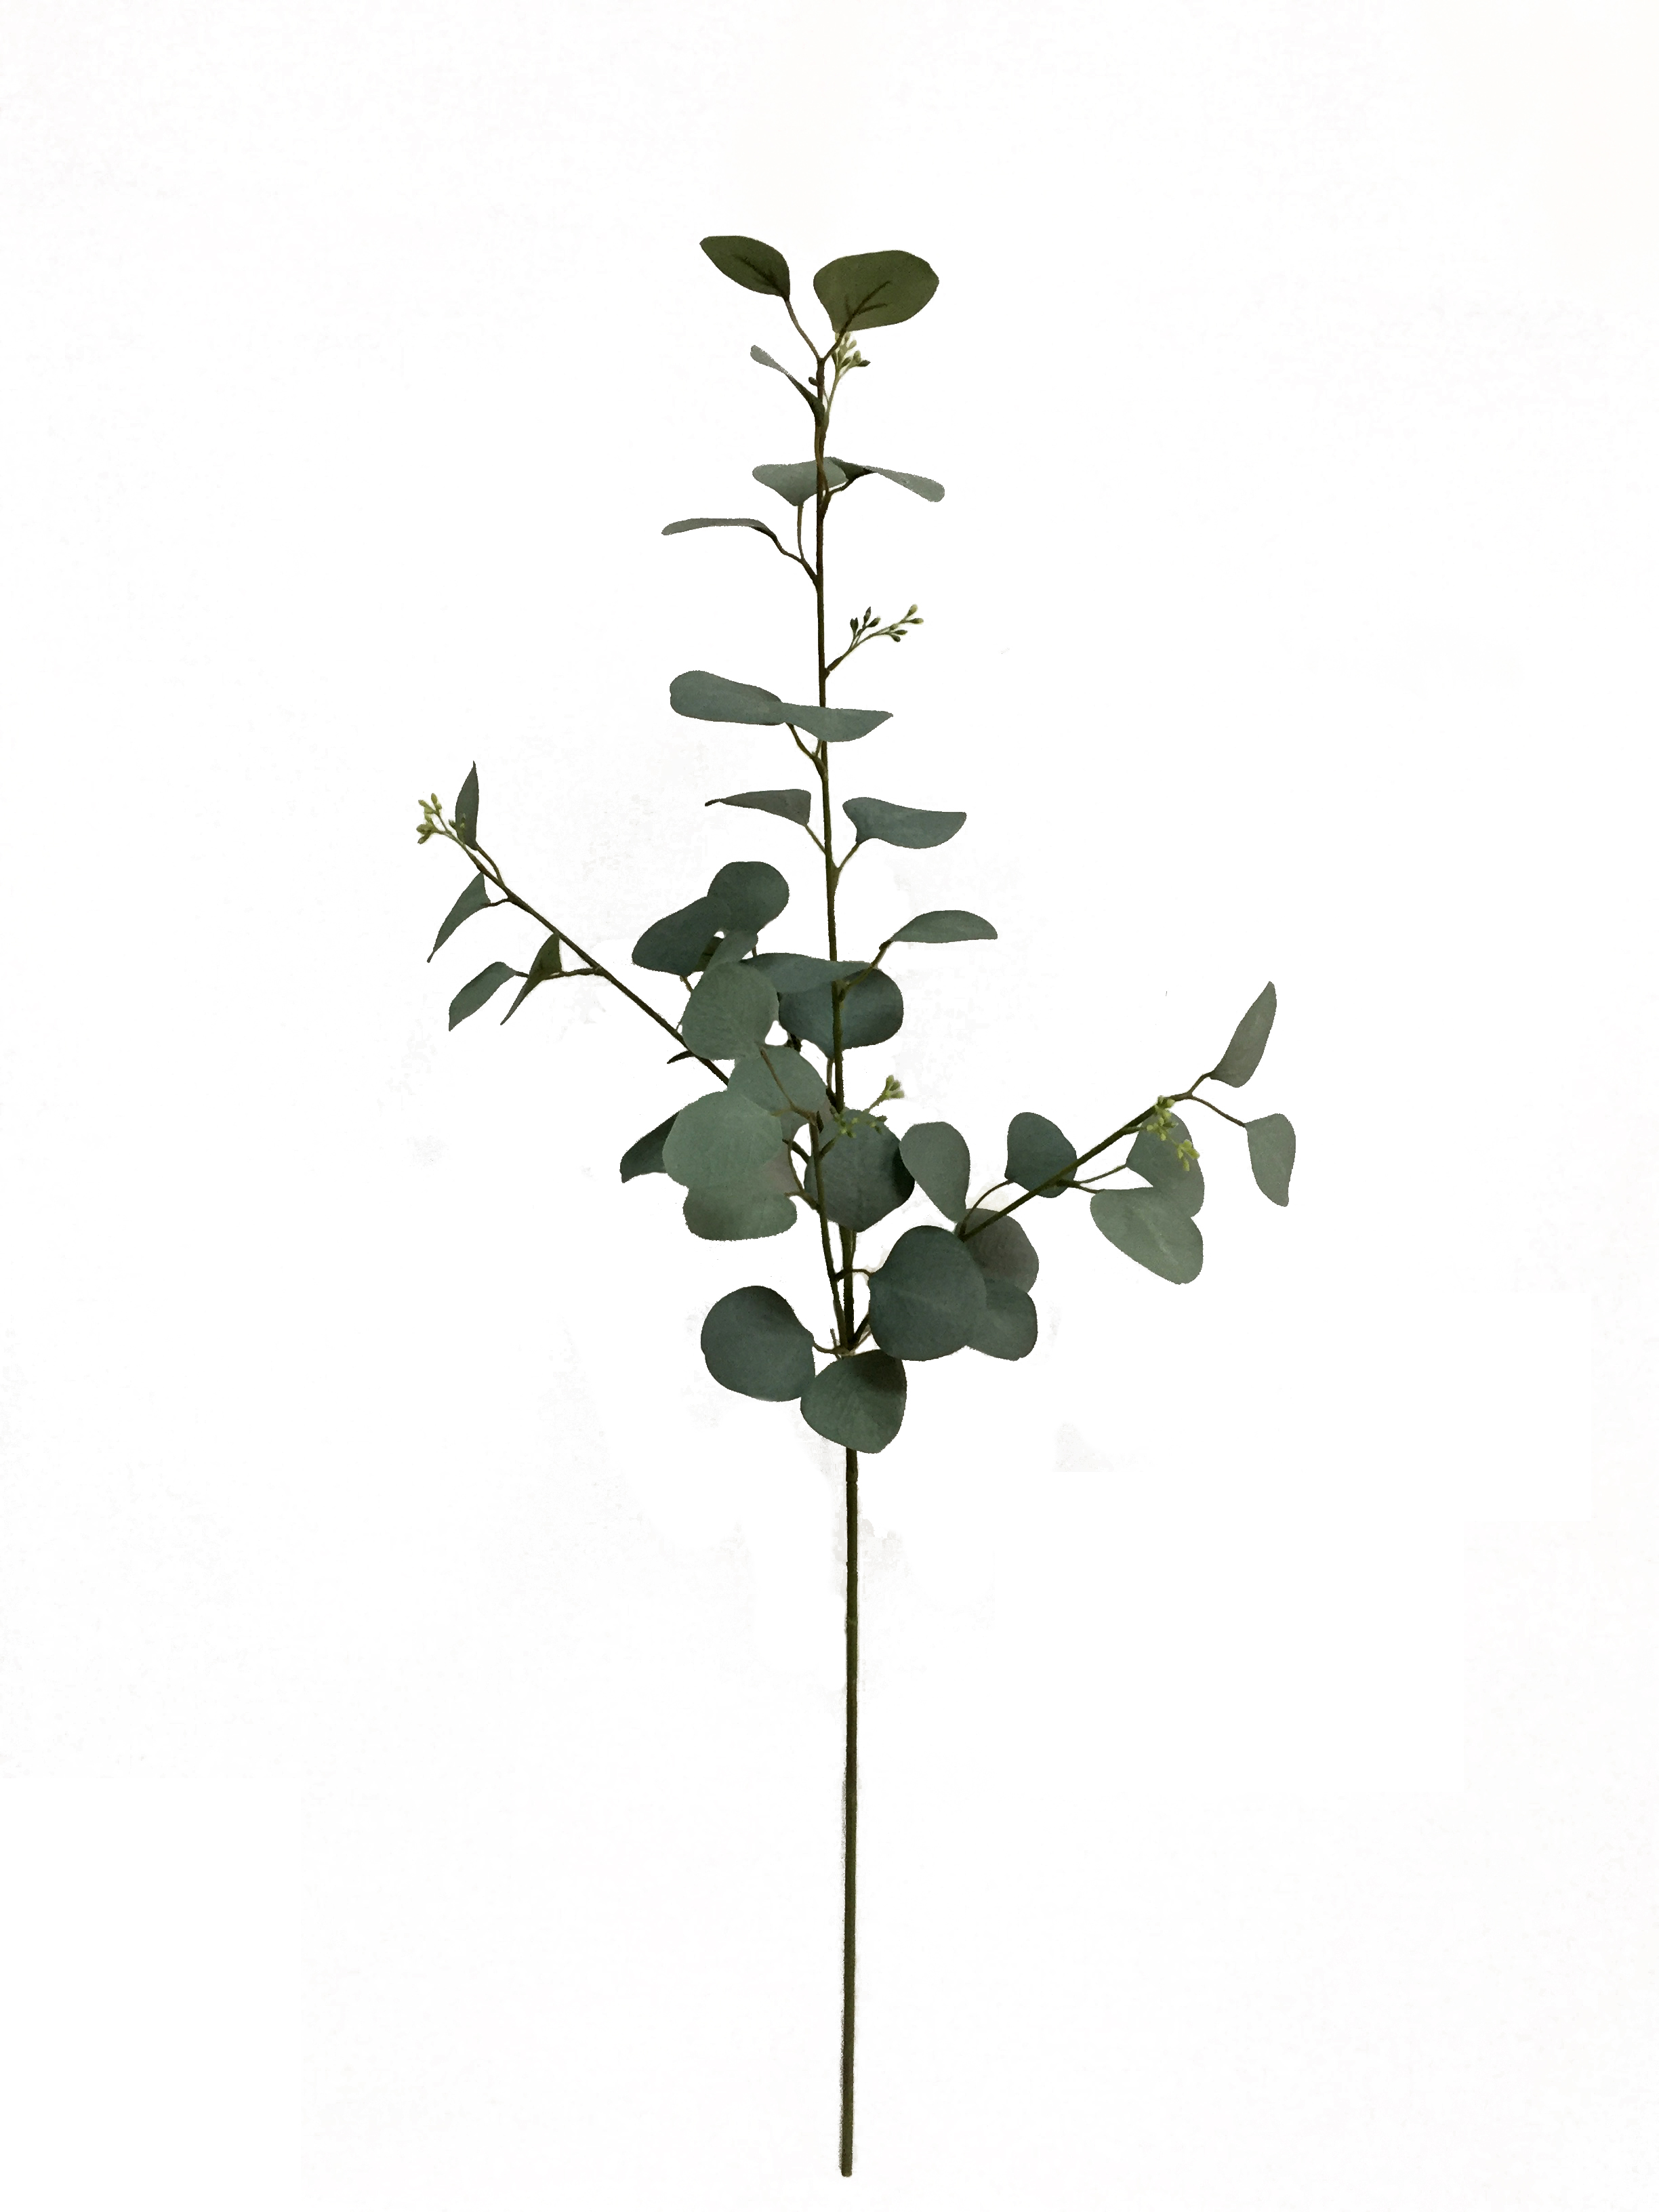 Mainstays Artificial Green Round Leaf Eucalyptus Stem, 34in Tall Floral Picks - image 5 of 5